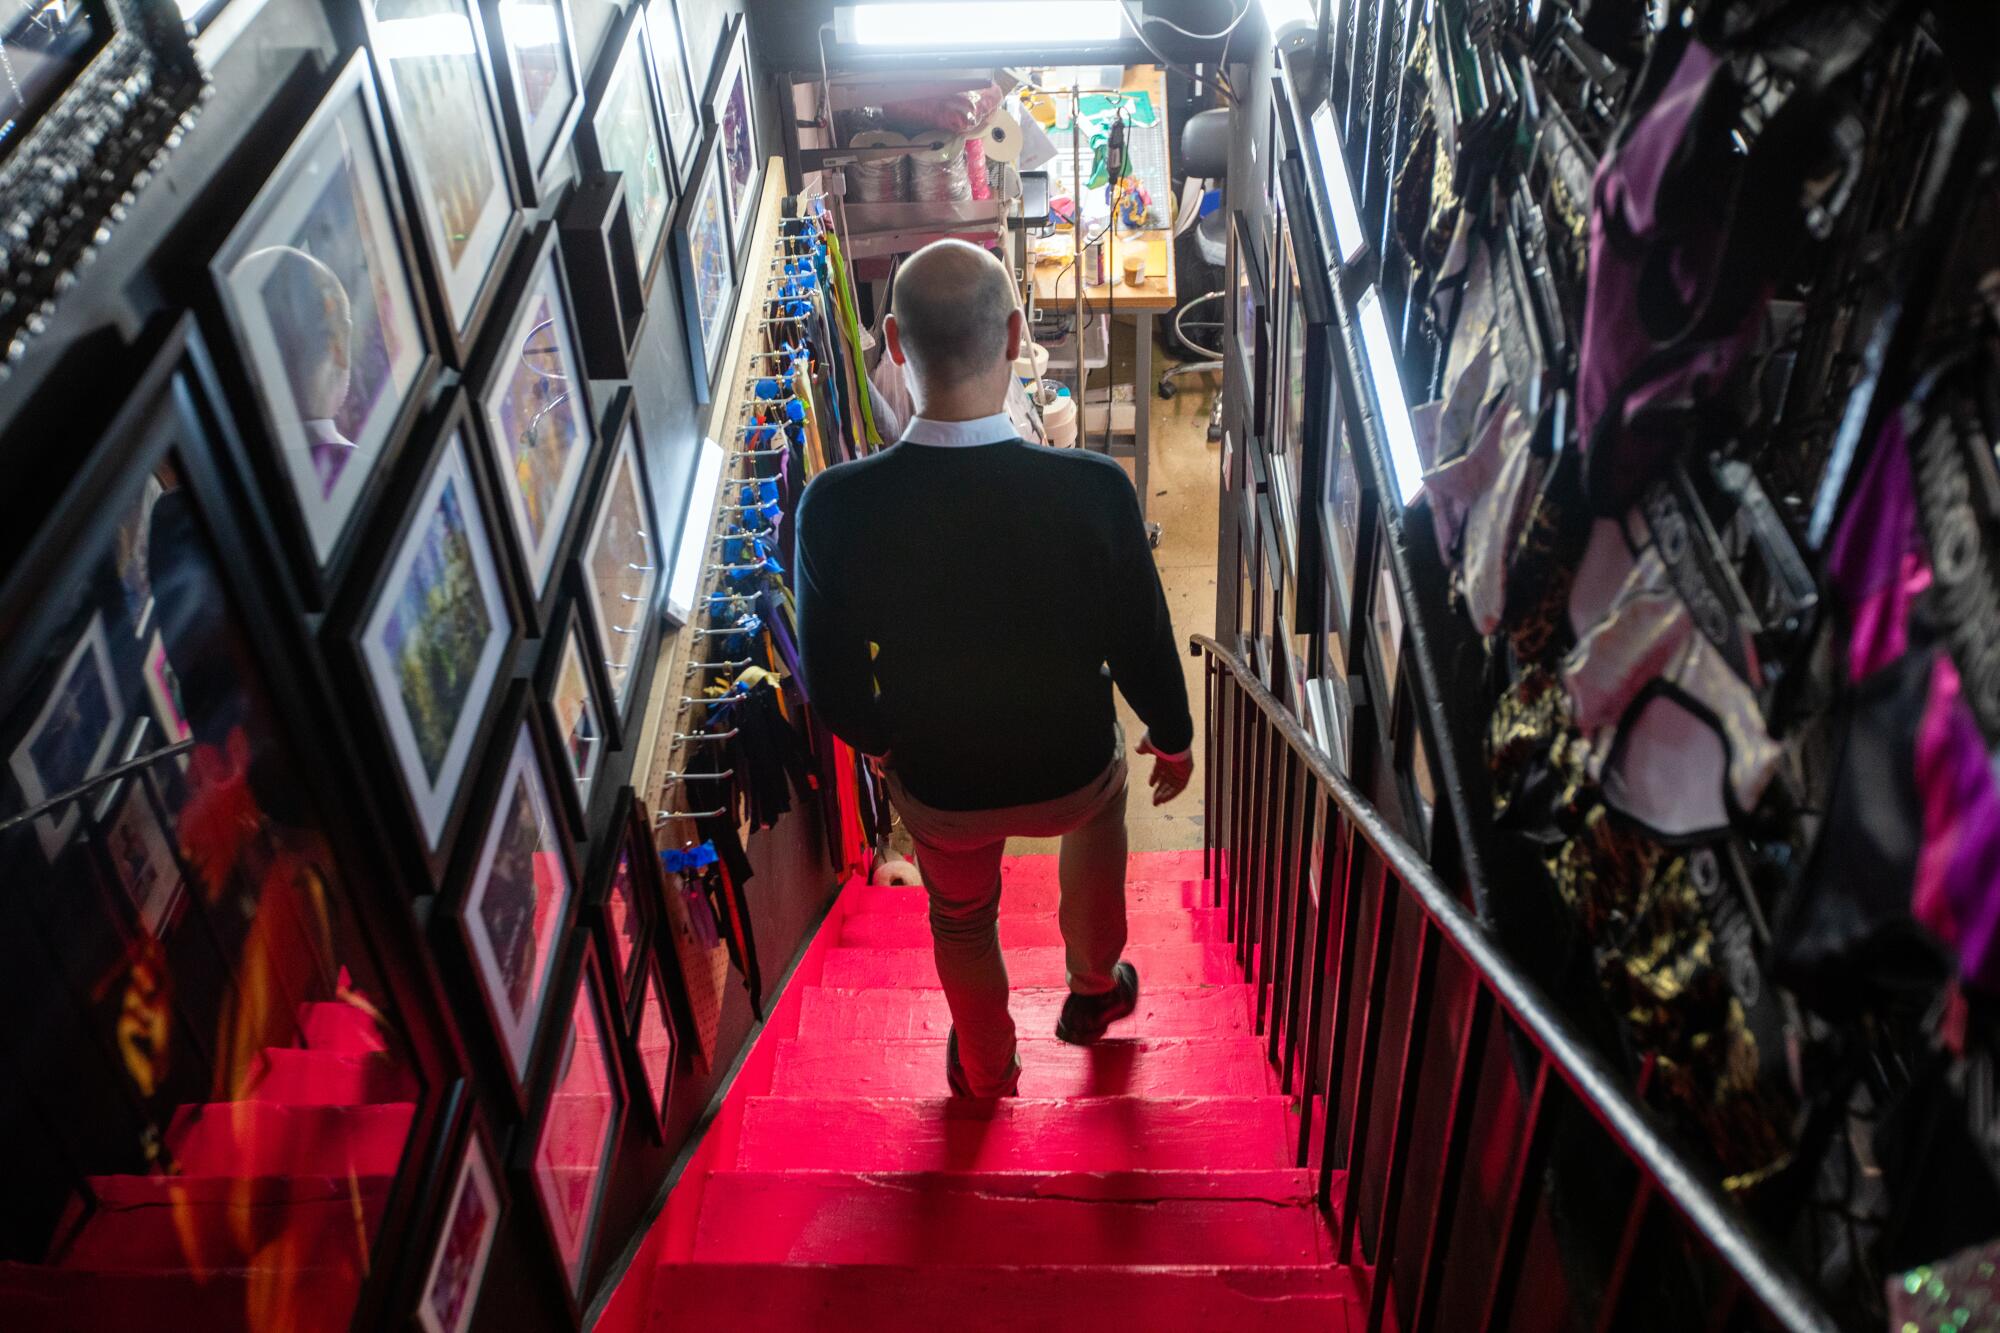 Chris Psaila, CEO of Marco Marco, walks down the stairs at his business.